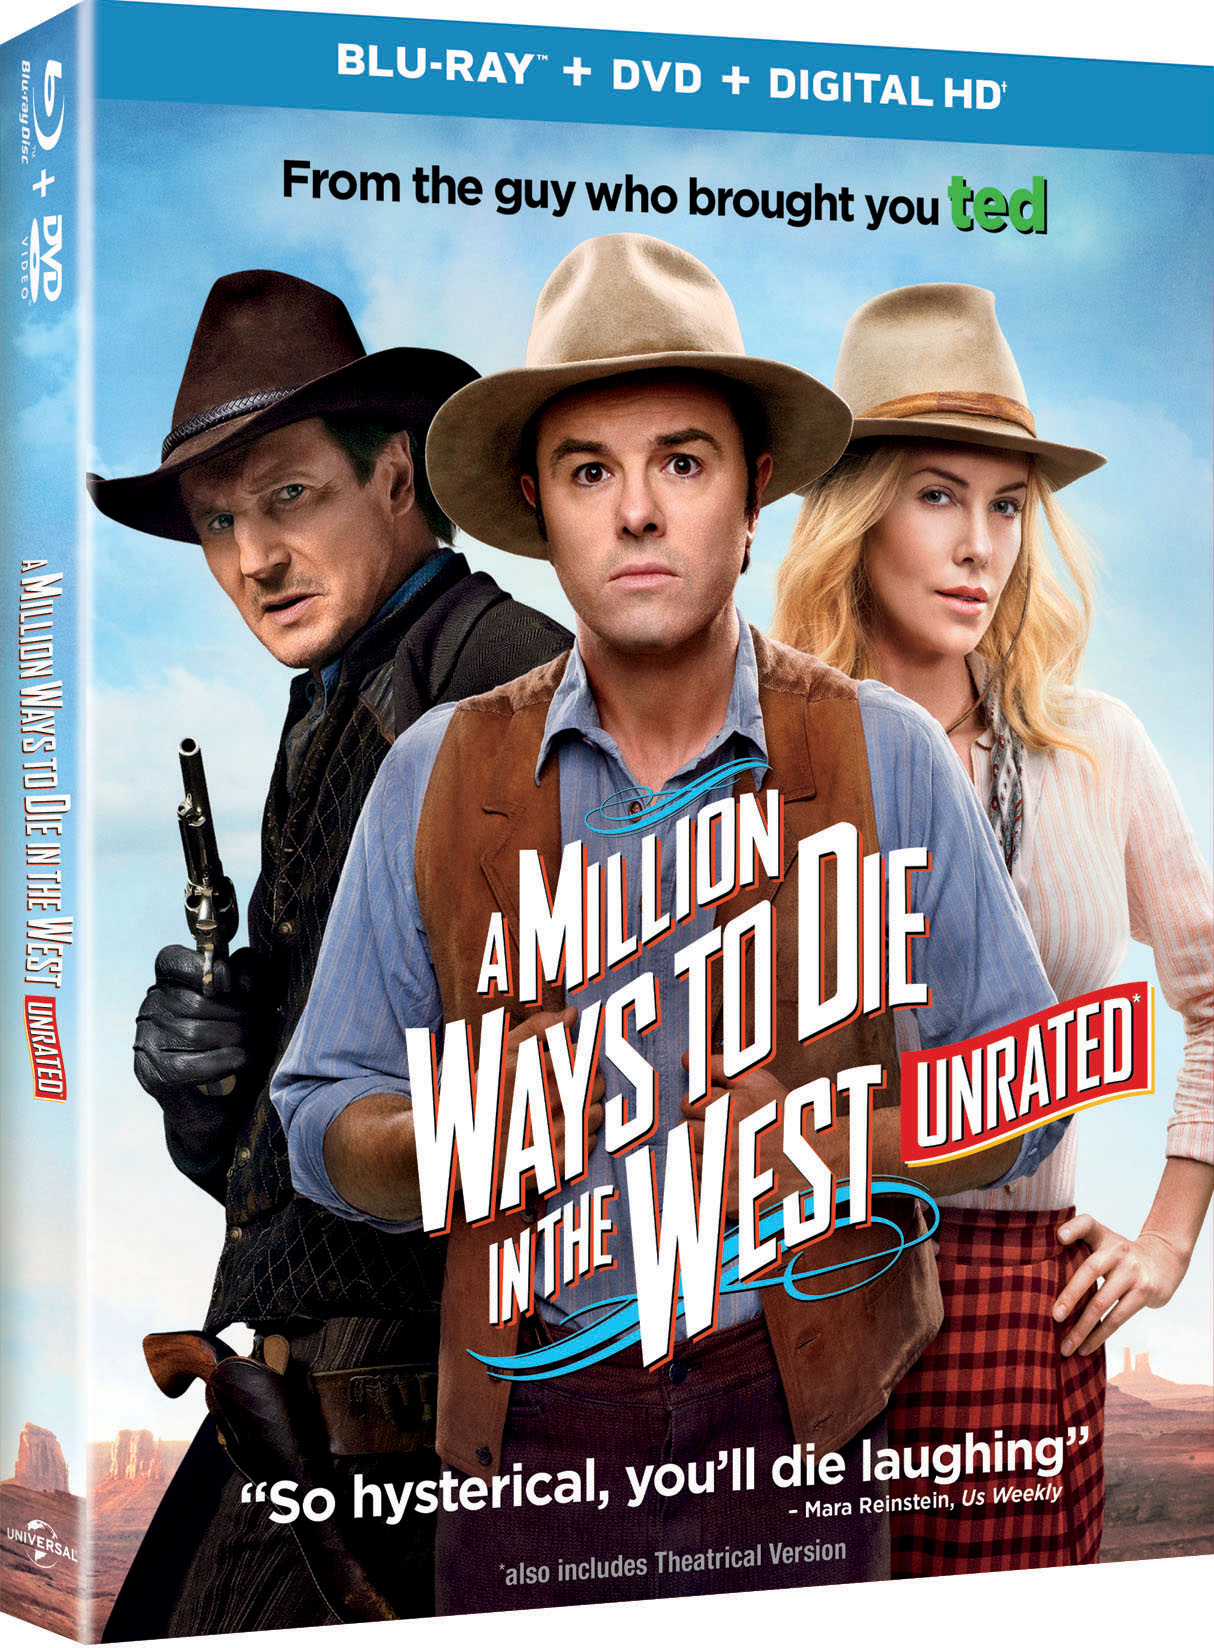 A Million Ways to Die in The West Blu-ray Review